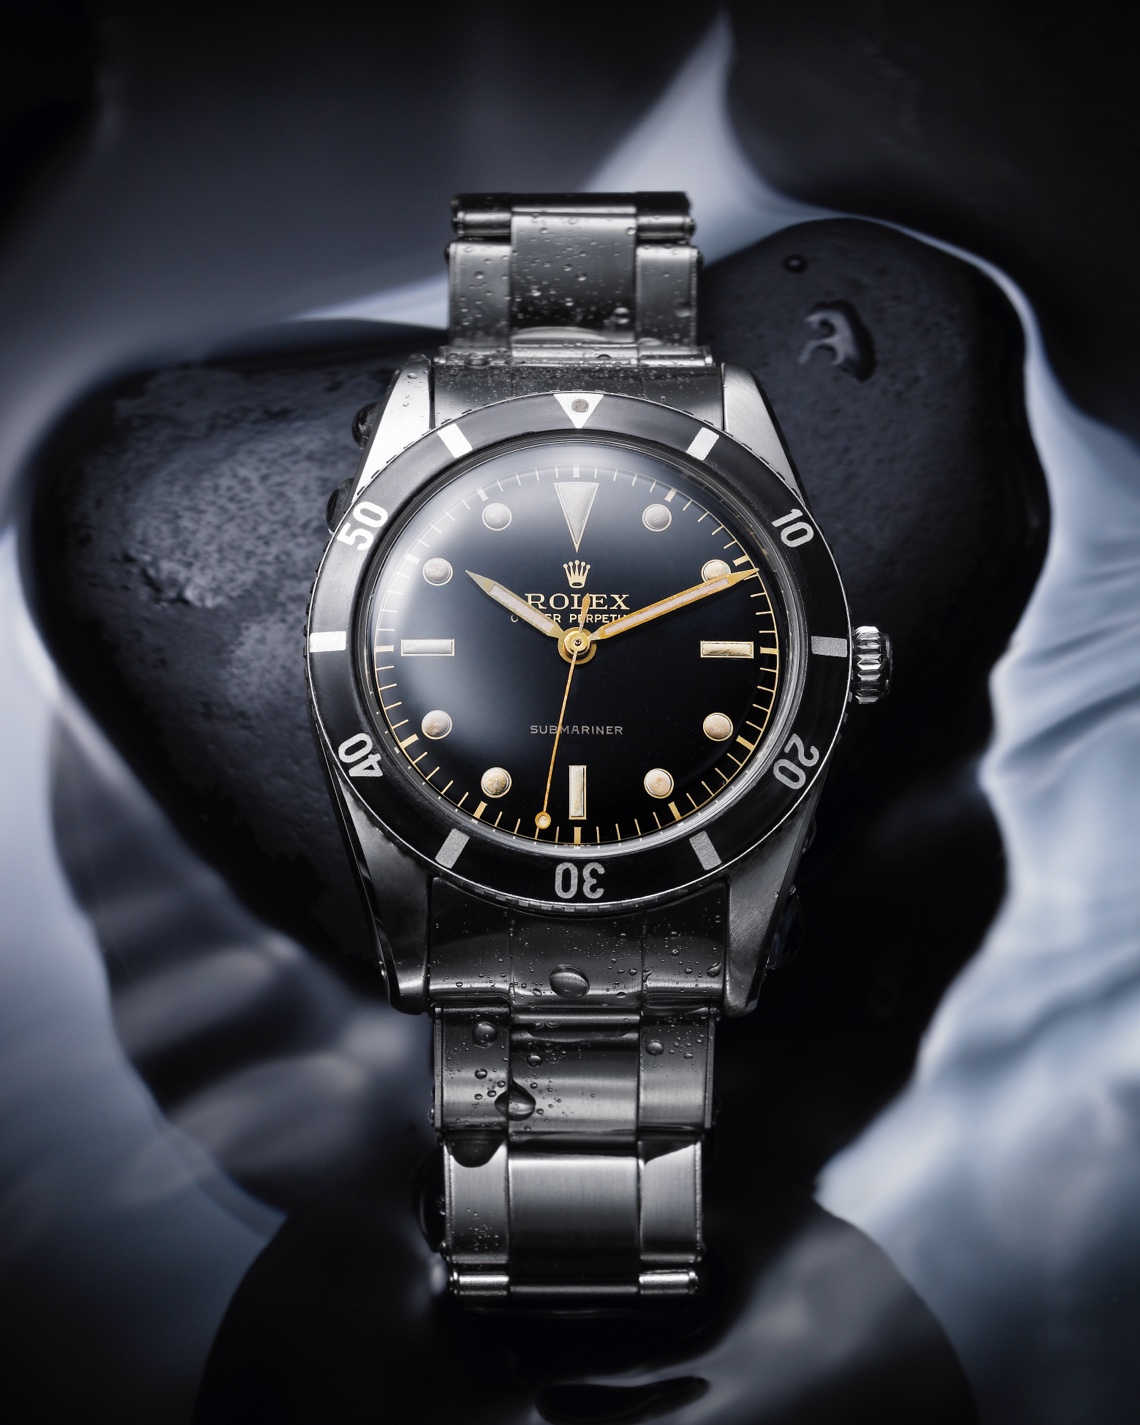 Rolex Submariner watches at Goldfinger Jewelry